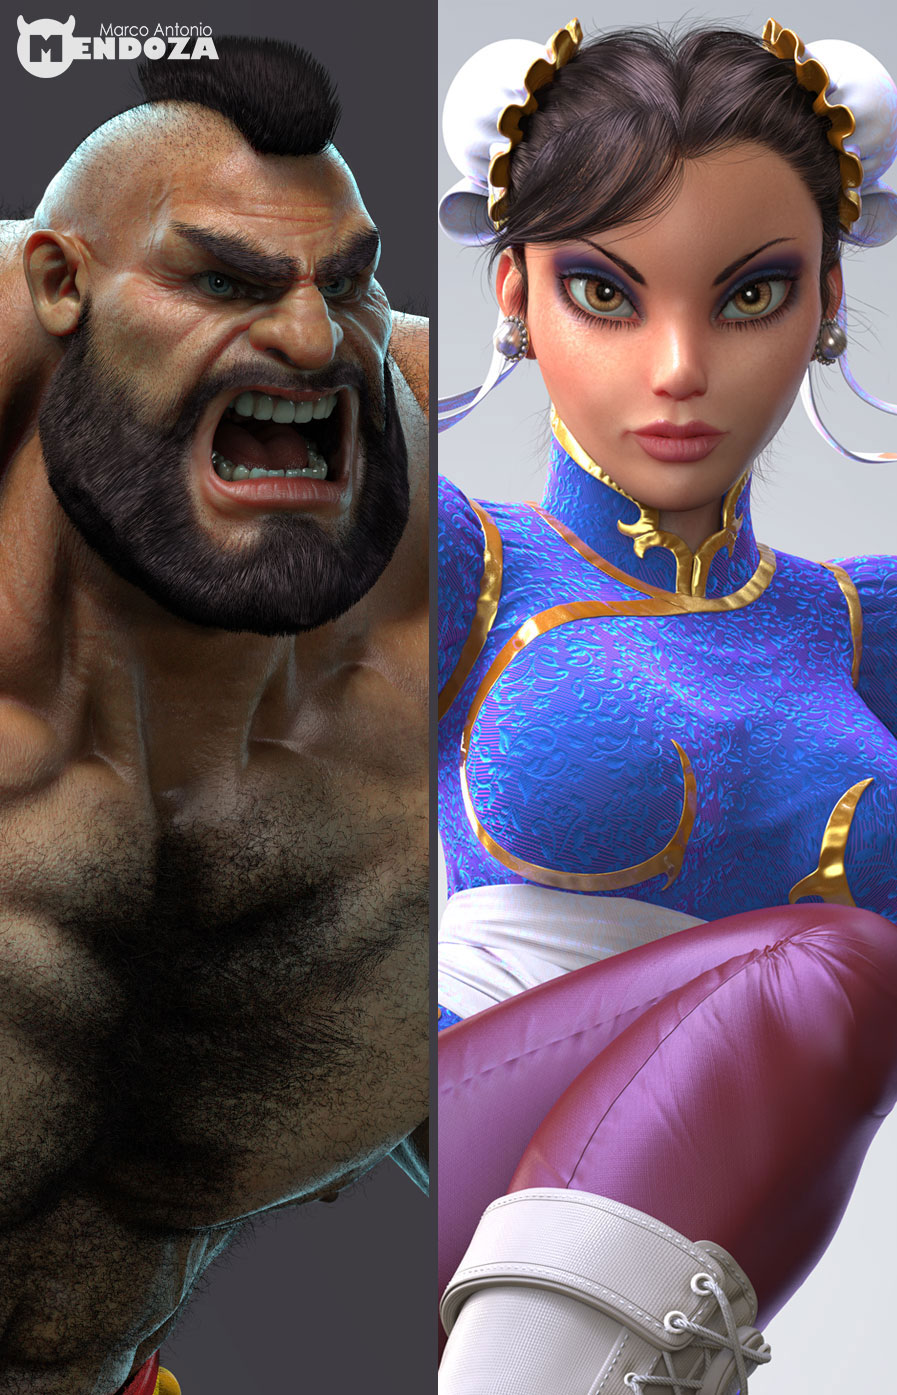 Street fighter fan art : Zangief and chun lee - ZBrushCentral